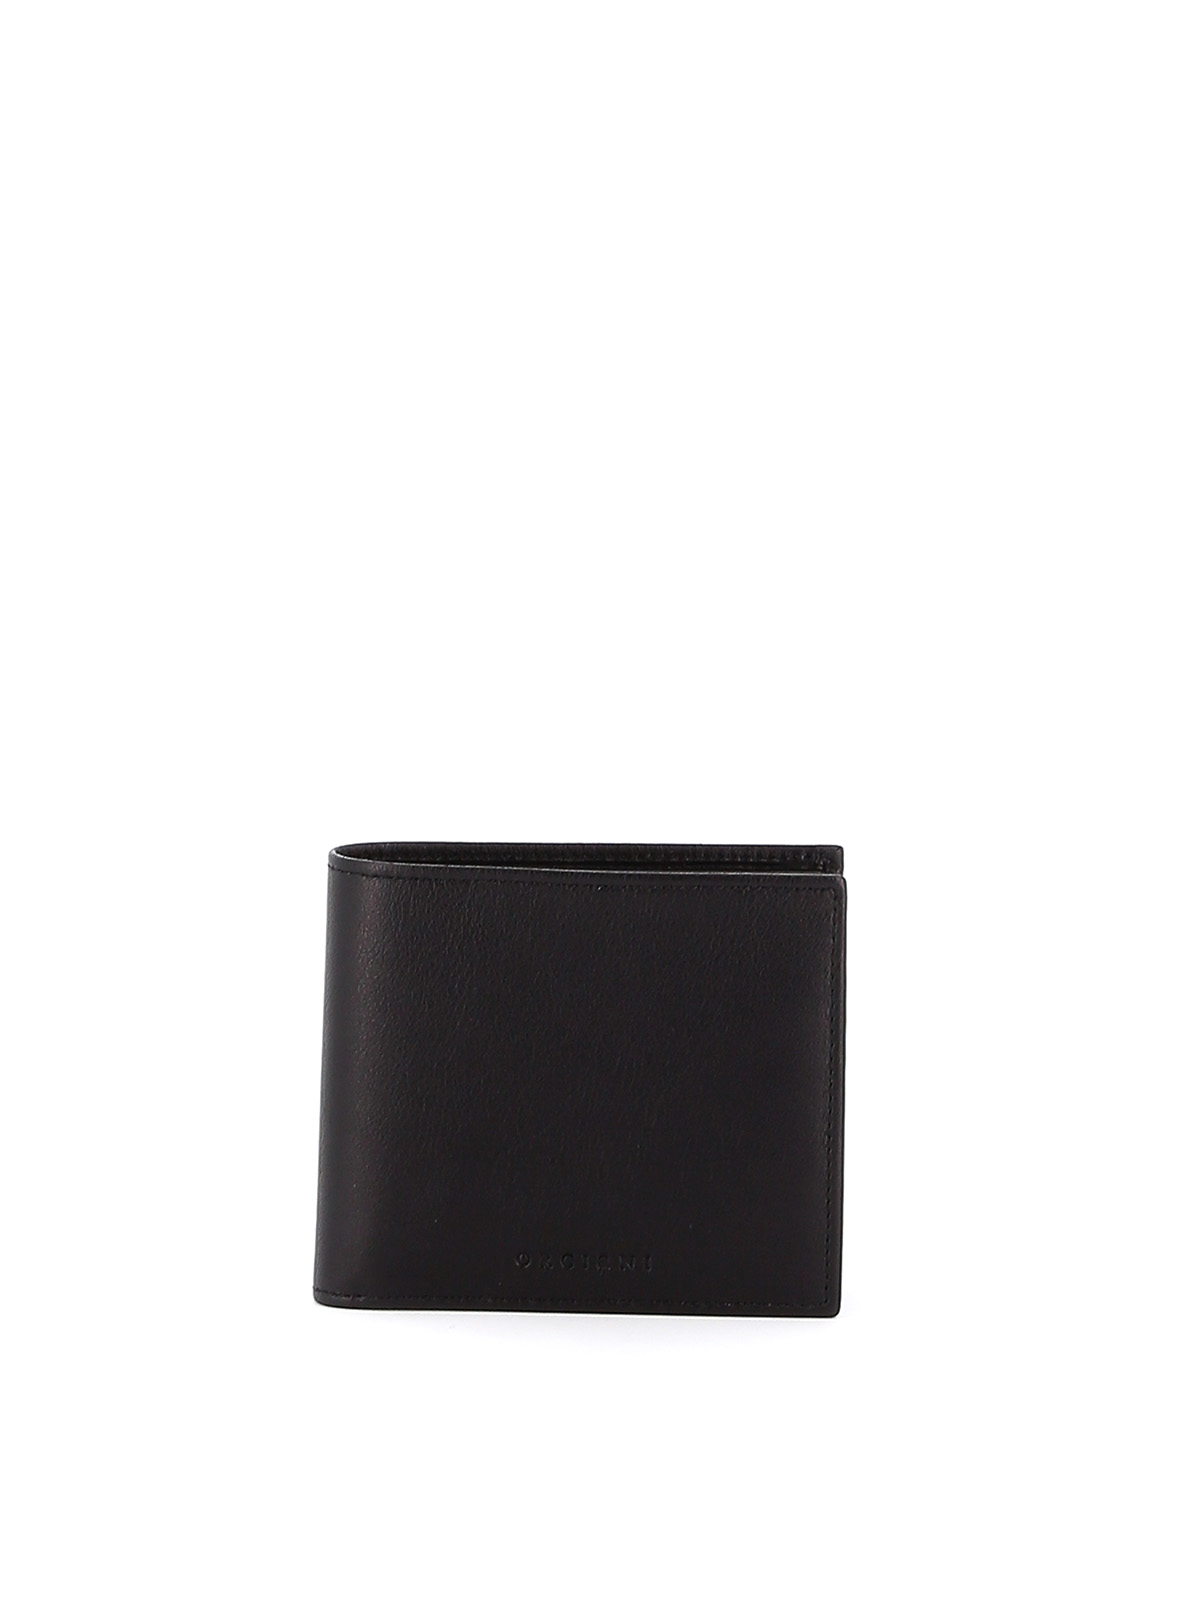 ORCIANI COIN POCKET LEATHER BIFOLD WALLET